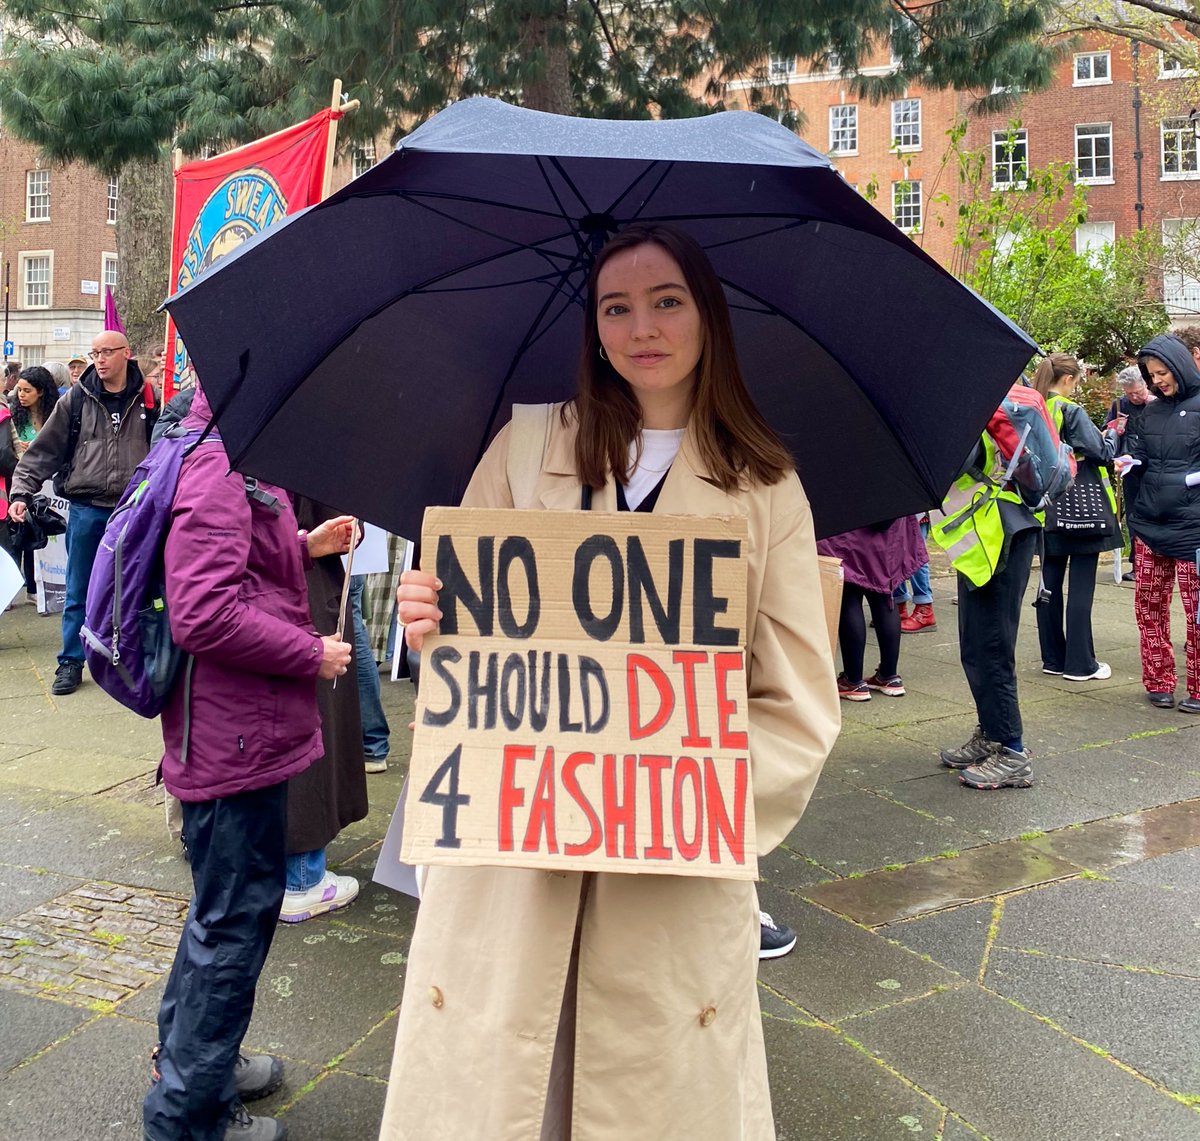 it's been 10 years since the horrifying events of #RanaPlaza and fast fashion is still causing massive environmental & social issues

A 🧵 OF QUICK / EASY WAYS YOU CAN HELP FIX THE FASHION INDUSTRY THIS #FashionRevolutionWeek 👇